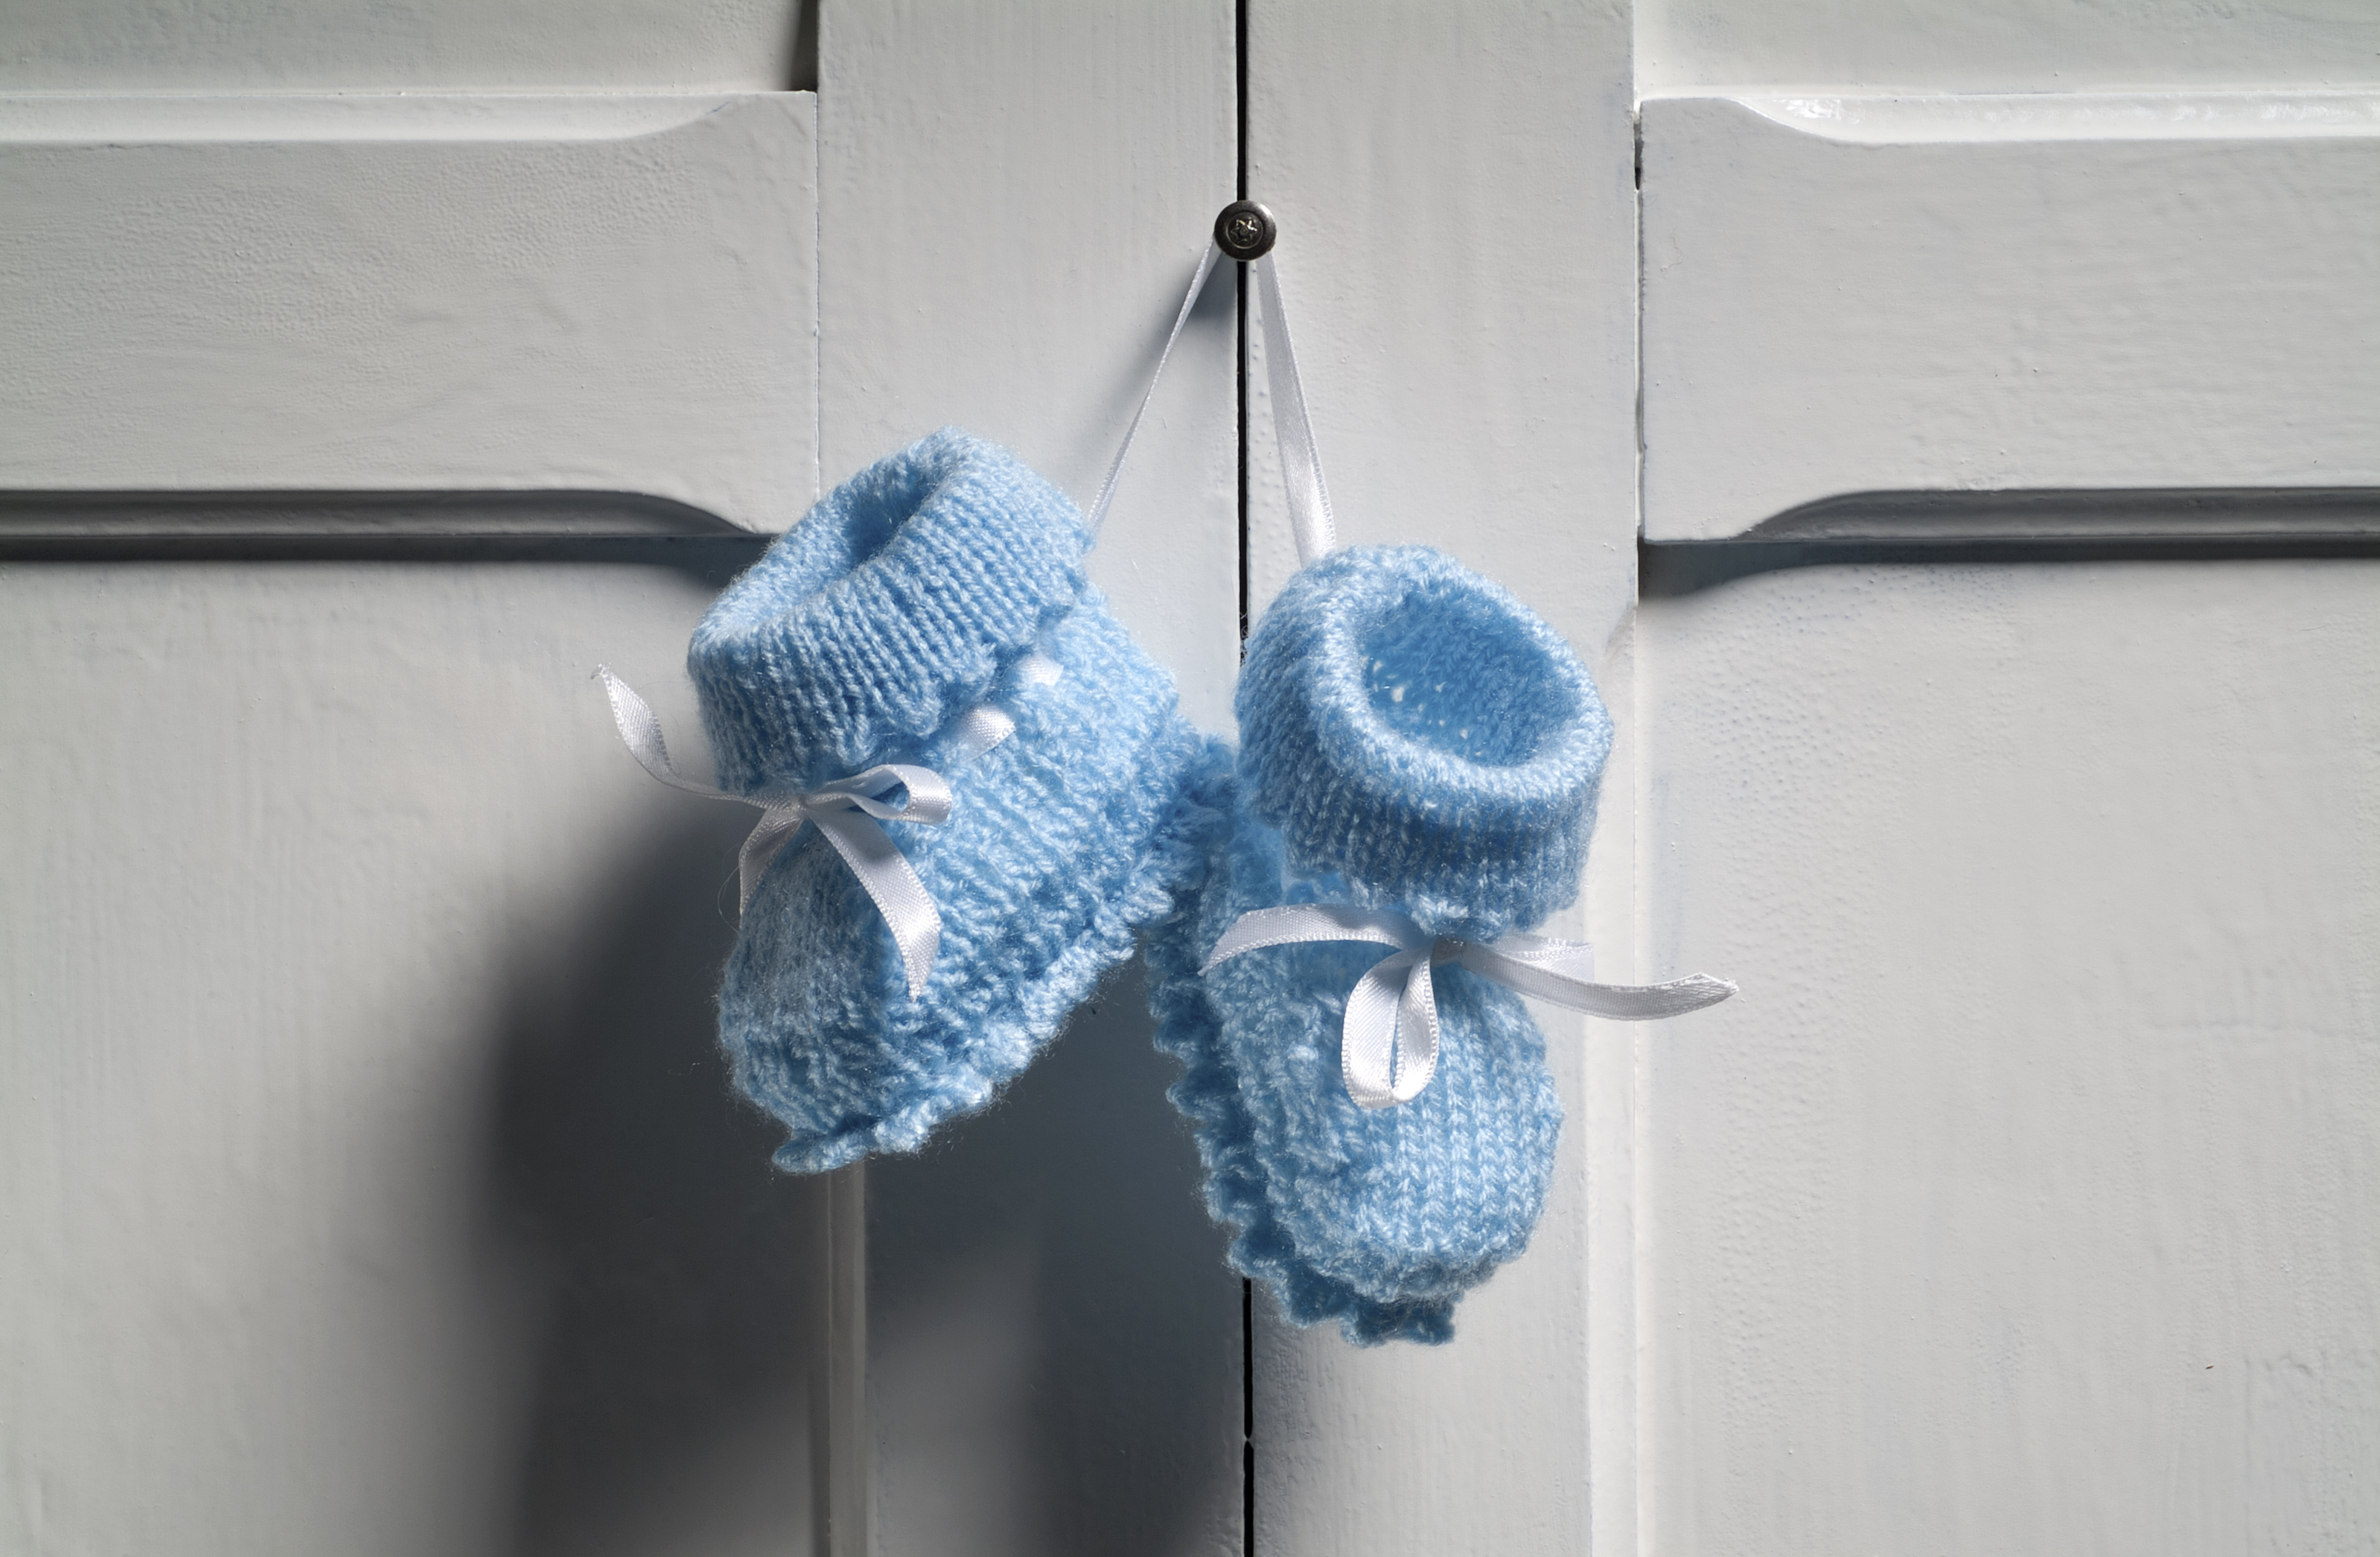 blue baby booties hang on wall